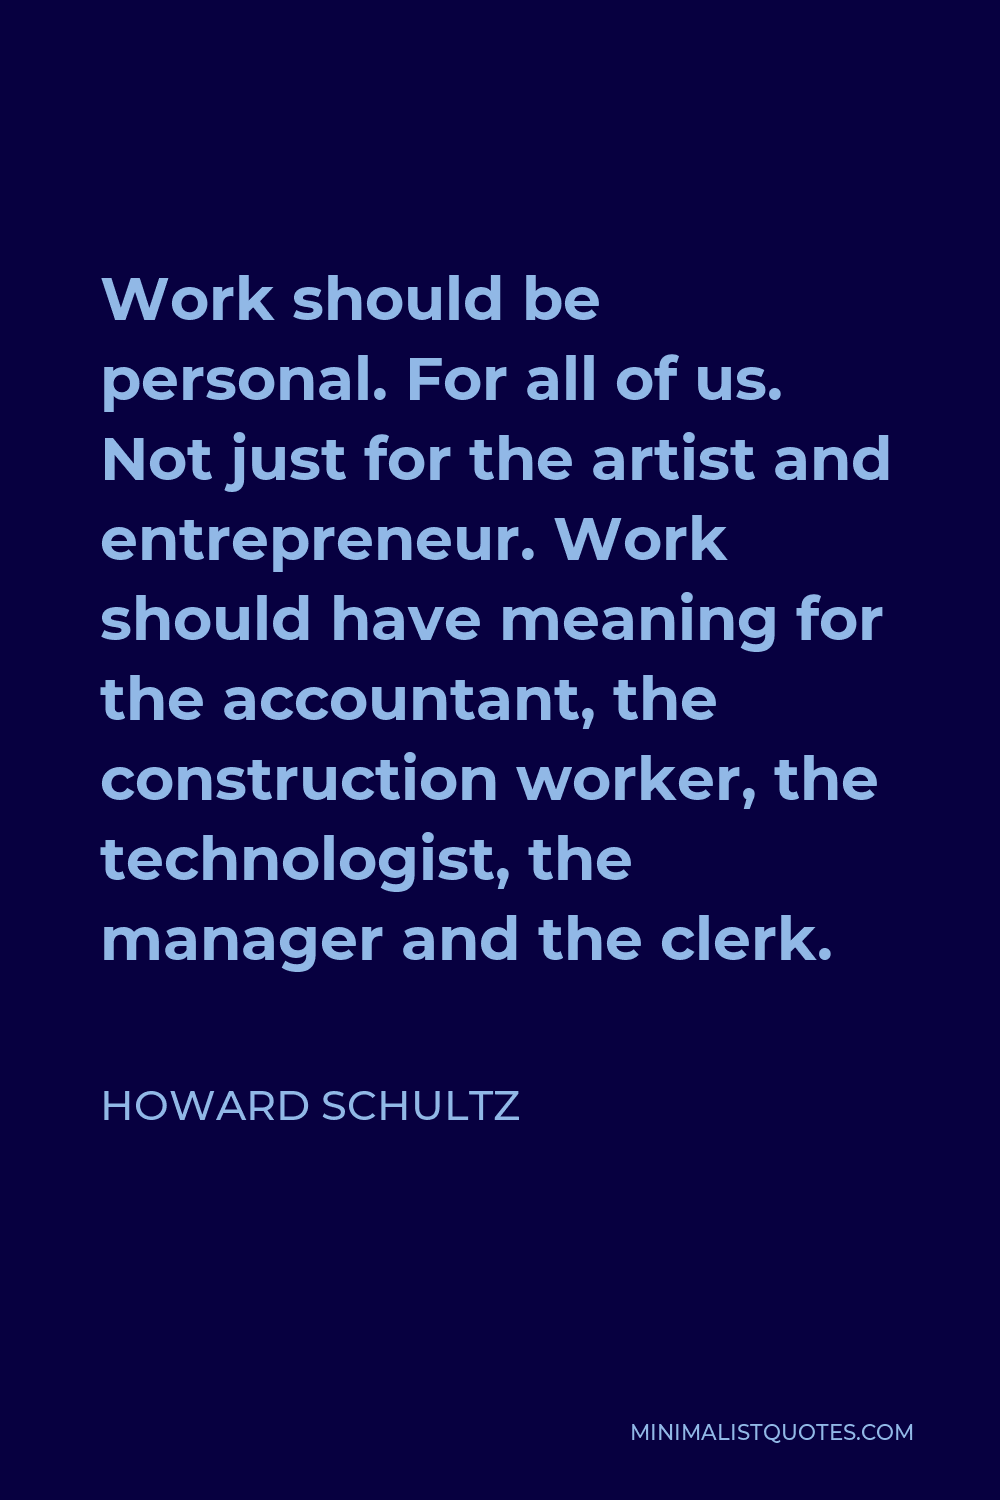 Howard Schultz Quote - Work should be personal. For all of us. Not just for the artist and entrepreneur. Work should have meaning for the accountant, the construction worker, the technologist, the manager and the clerk.